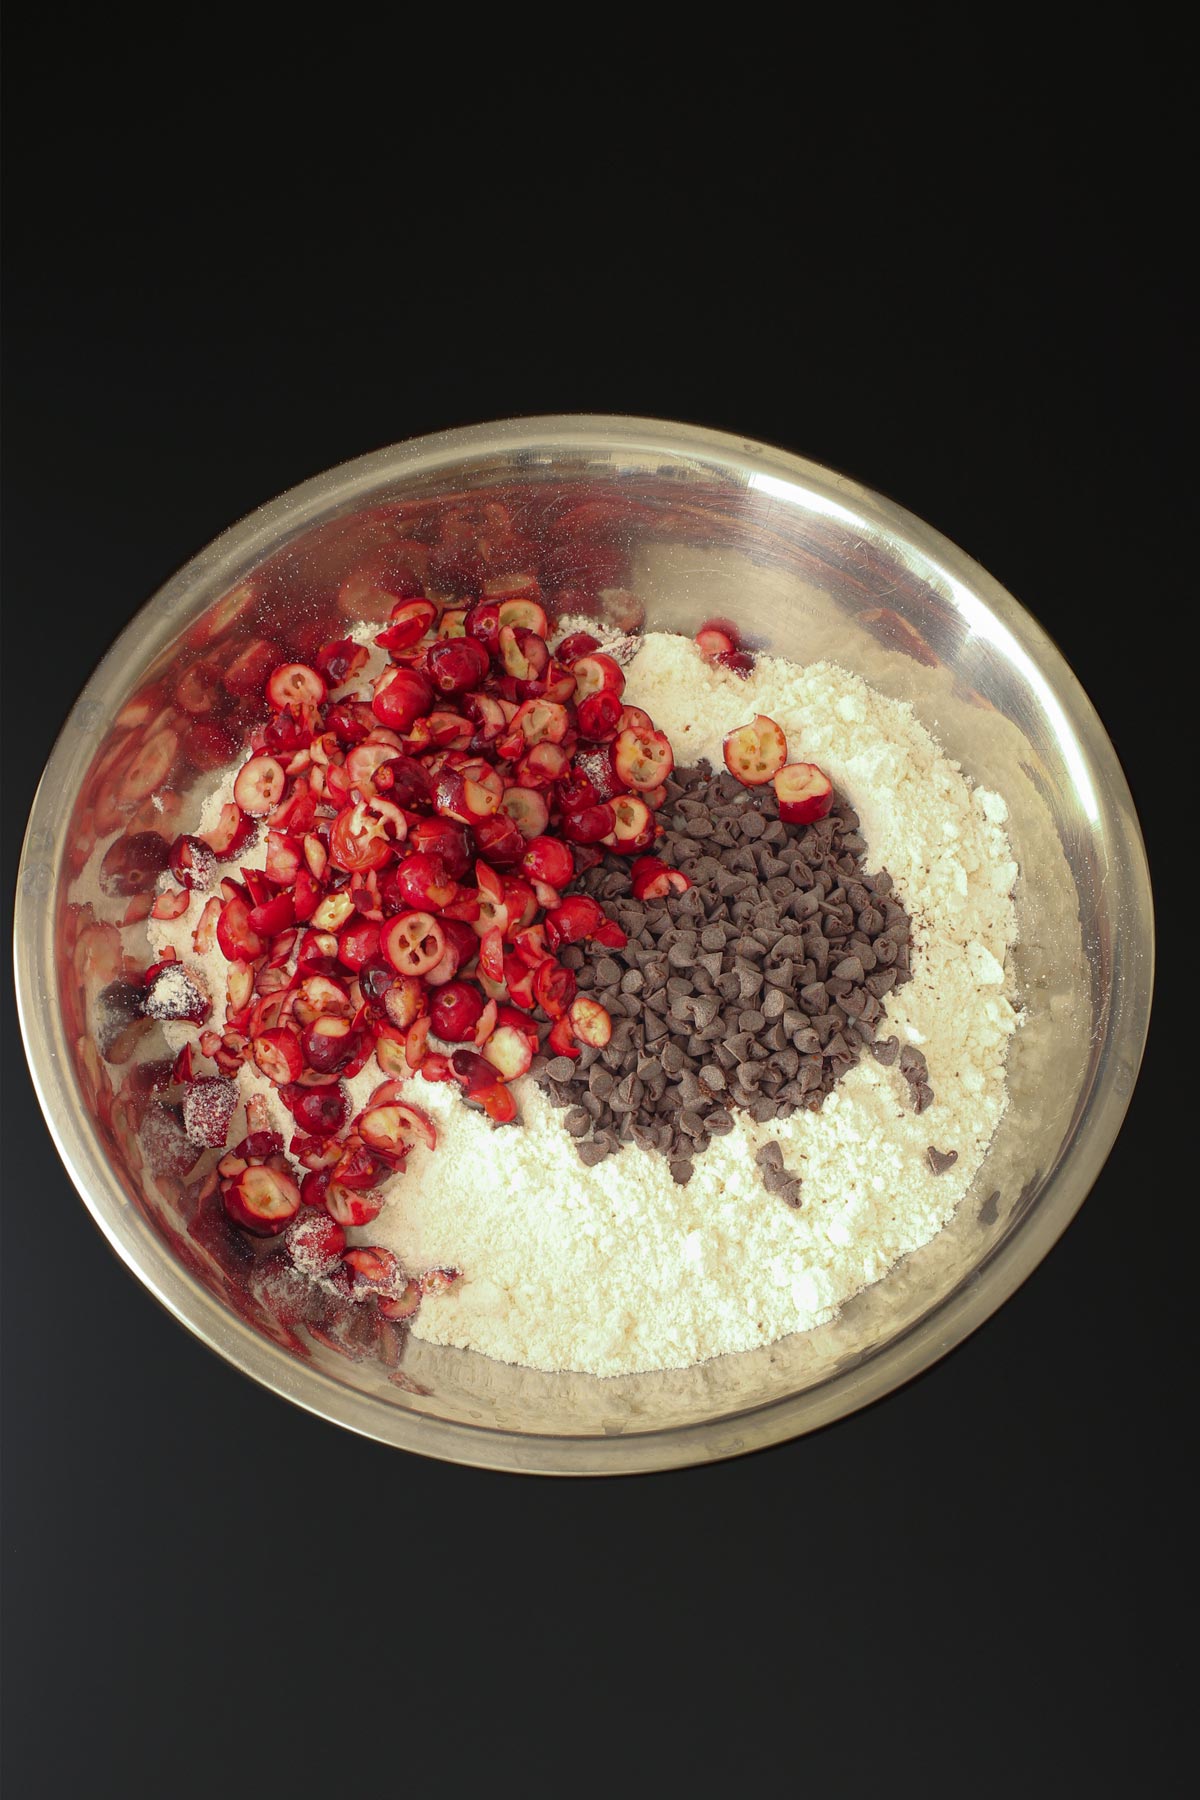 chopped cranberries and chocolate chips added to flour mixture in large metal bowl.